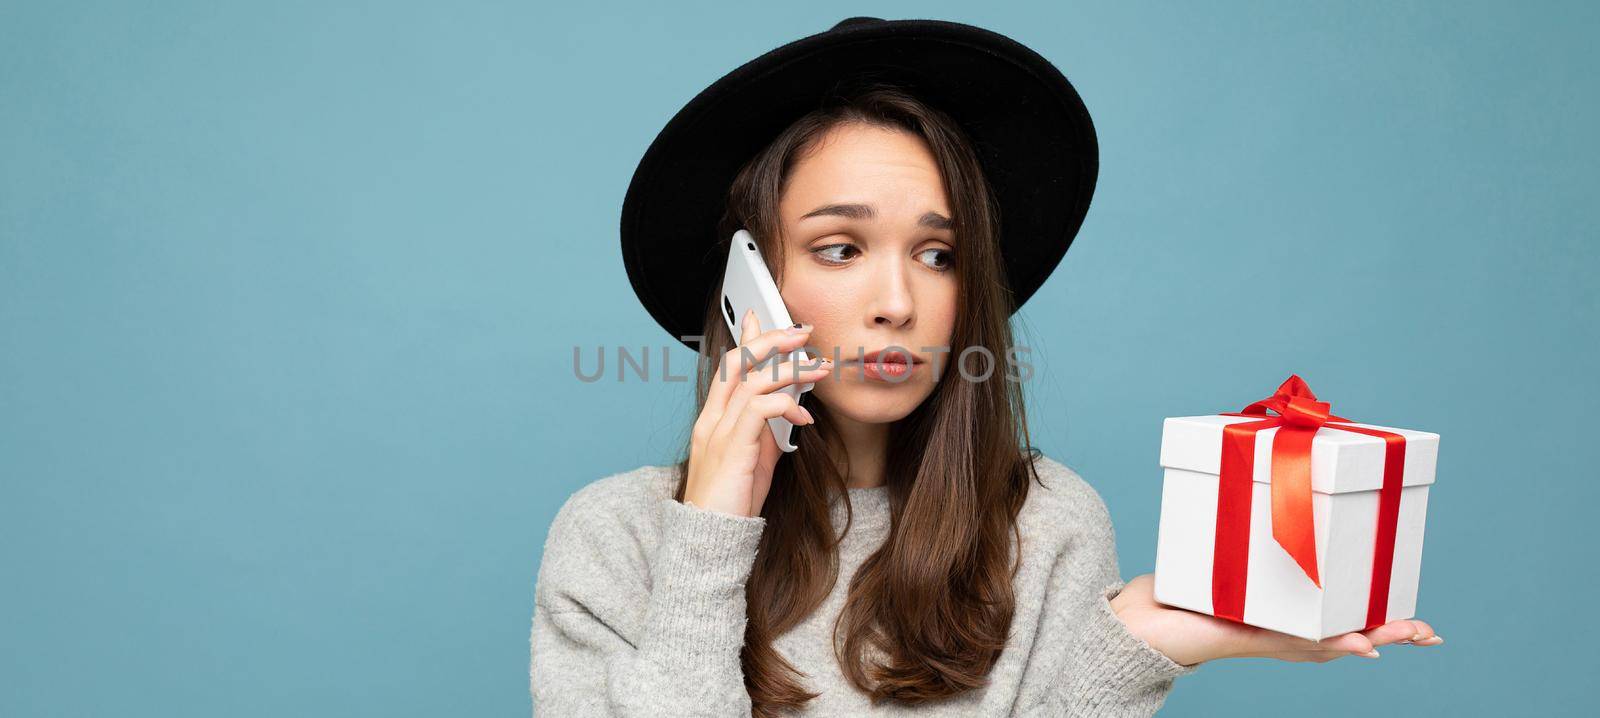 Photo of beautiful upset young brunette woman isolated over blue background wall wearing black hat and grey sweater holding gift box talking on mobile phone and looking to the side by TRMK